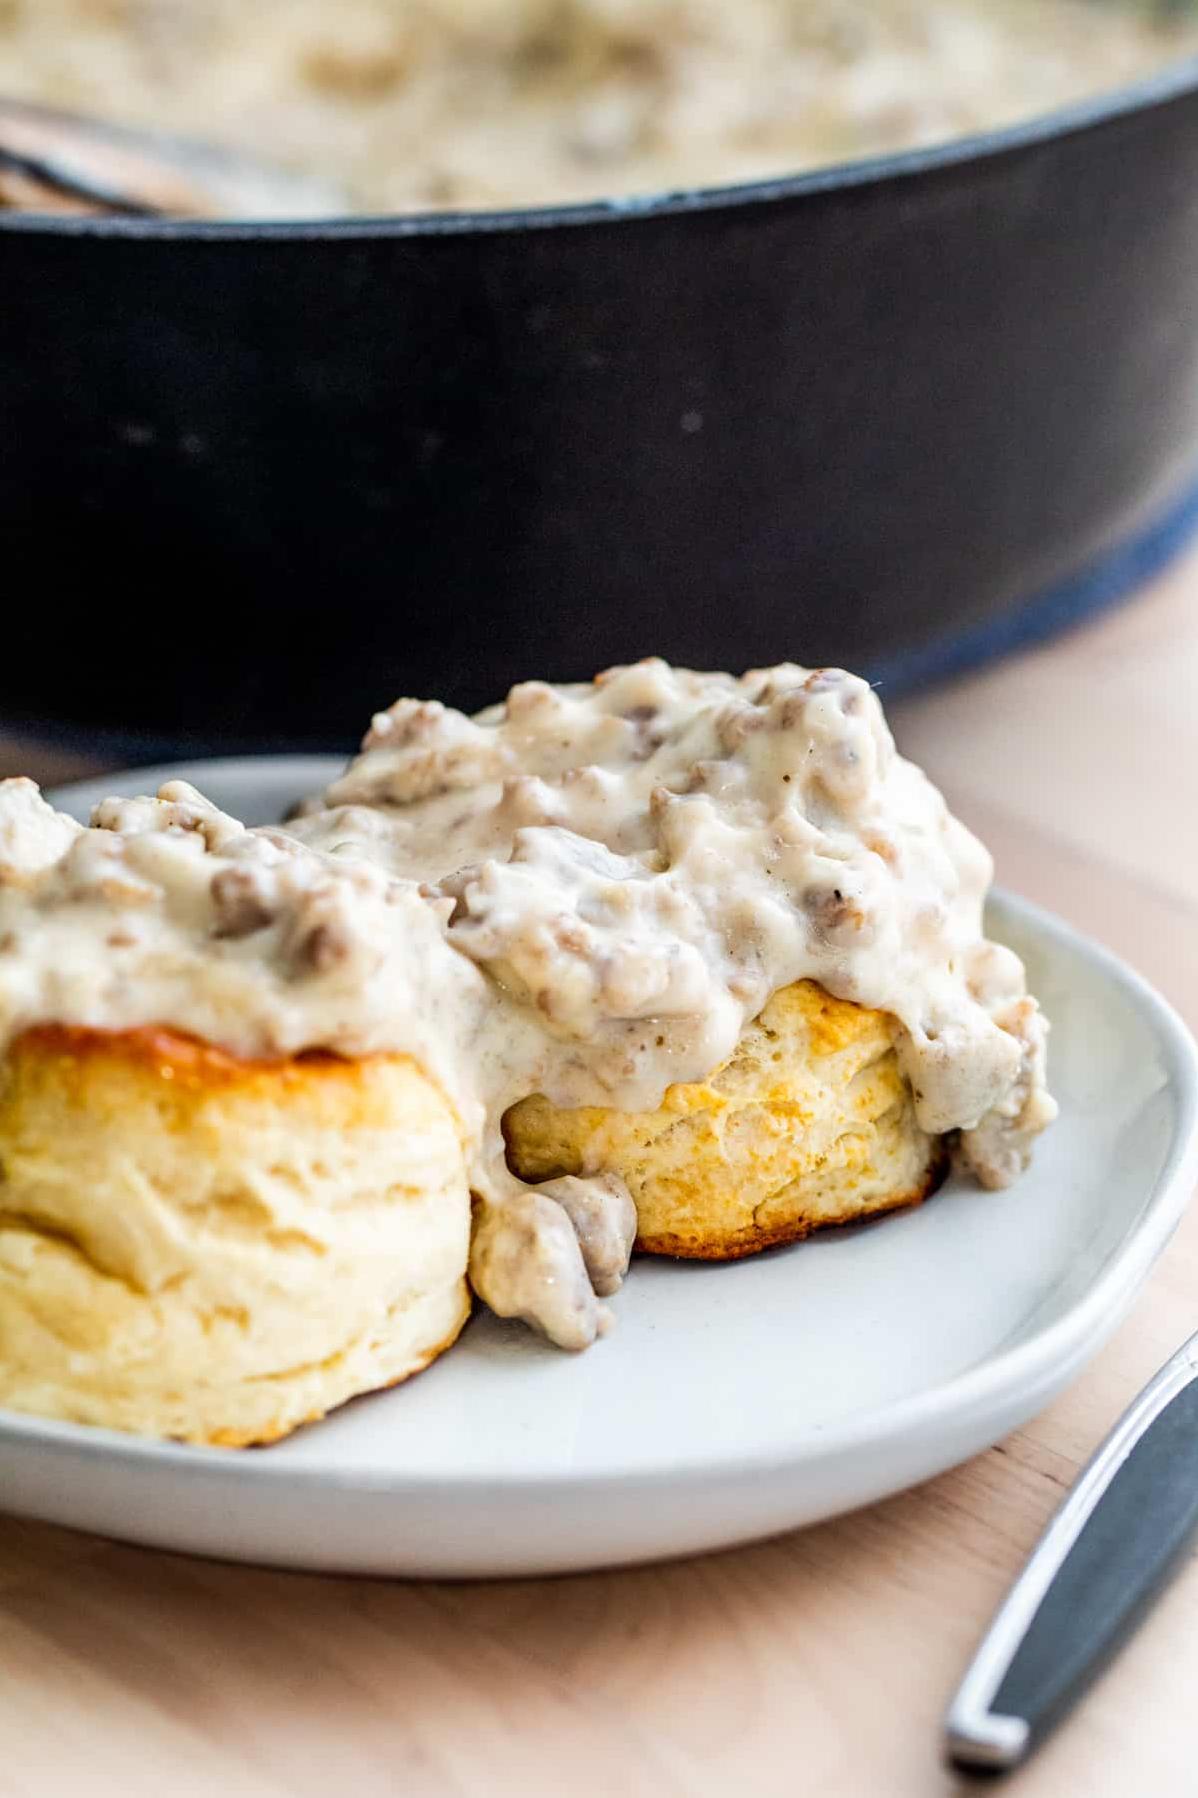  Gravy so creamy, you'll want to lick the plate!